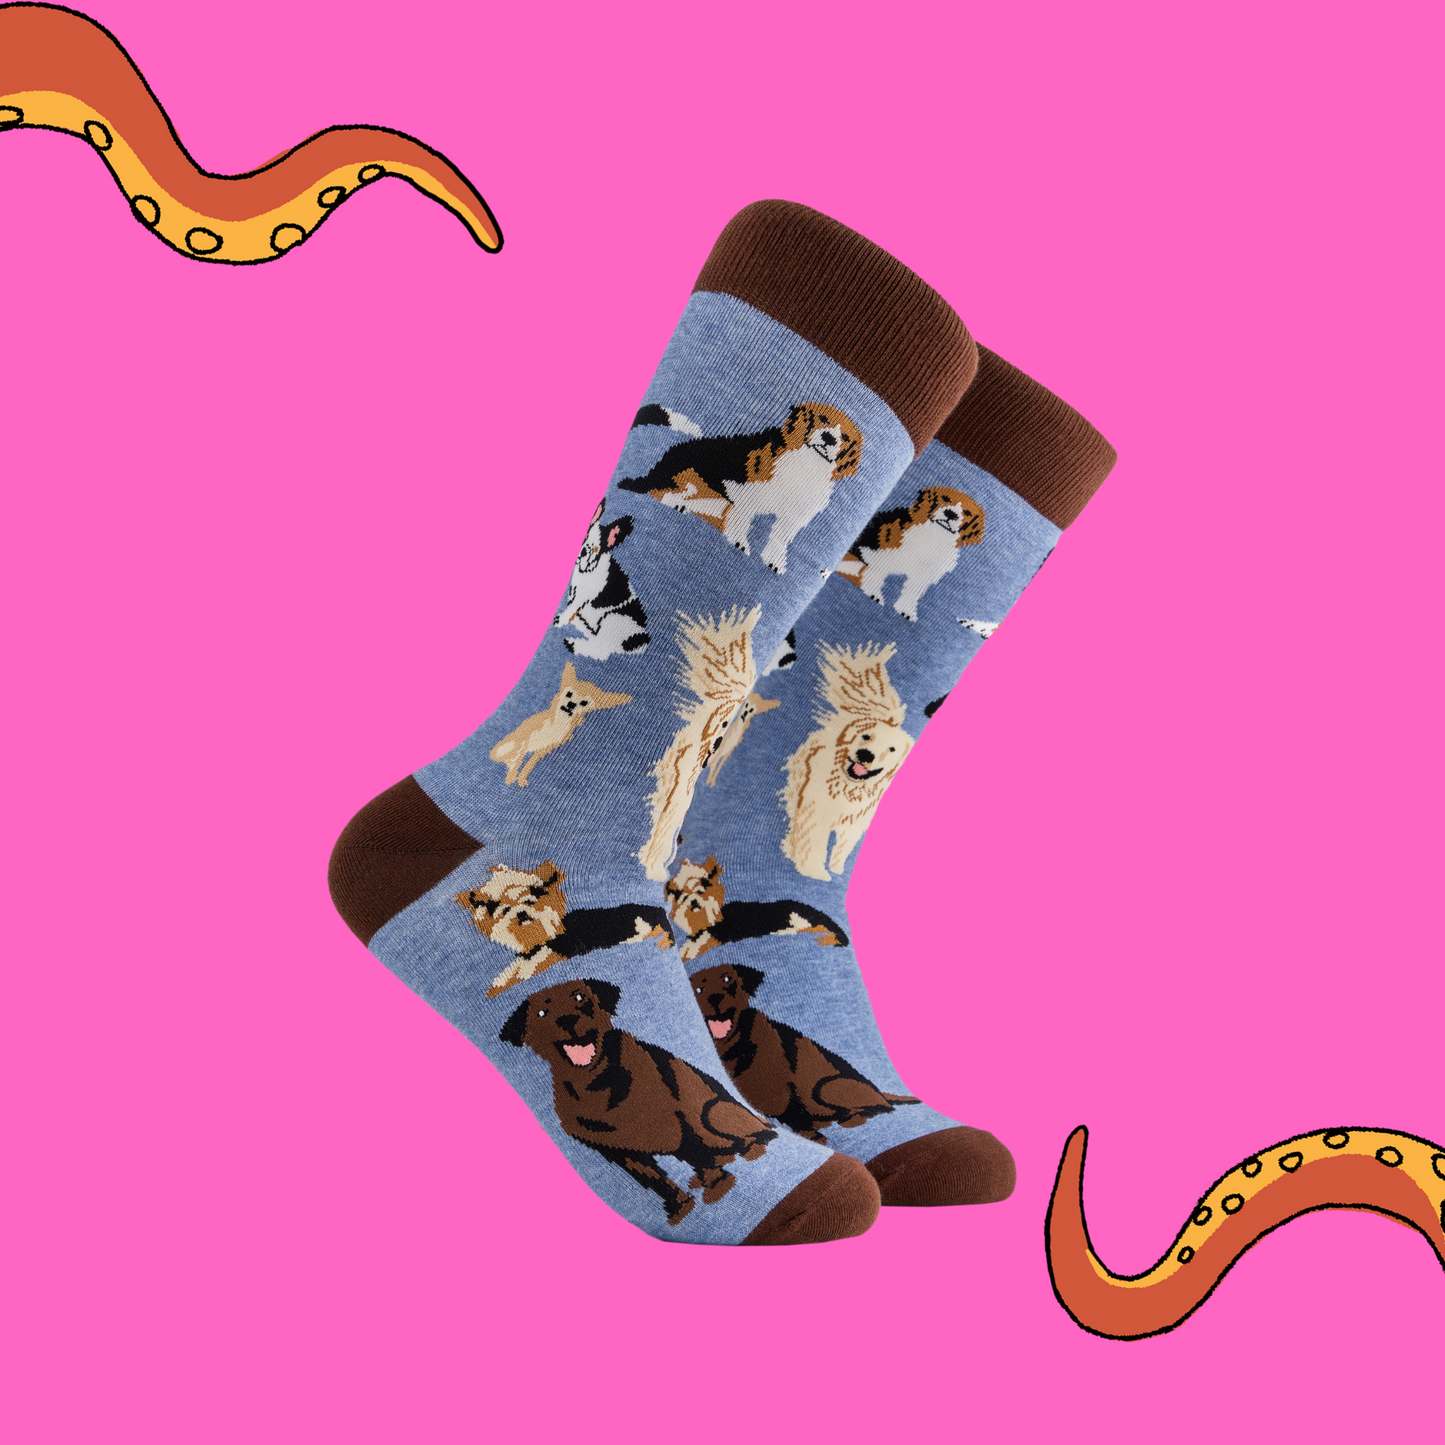 A pair of socks depicting different breeds of dog. Blue legs, brown cuff, heel and toe.